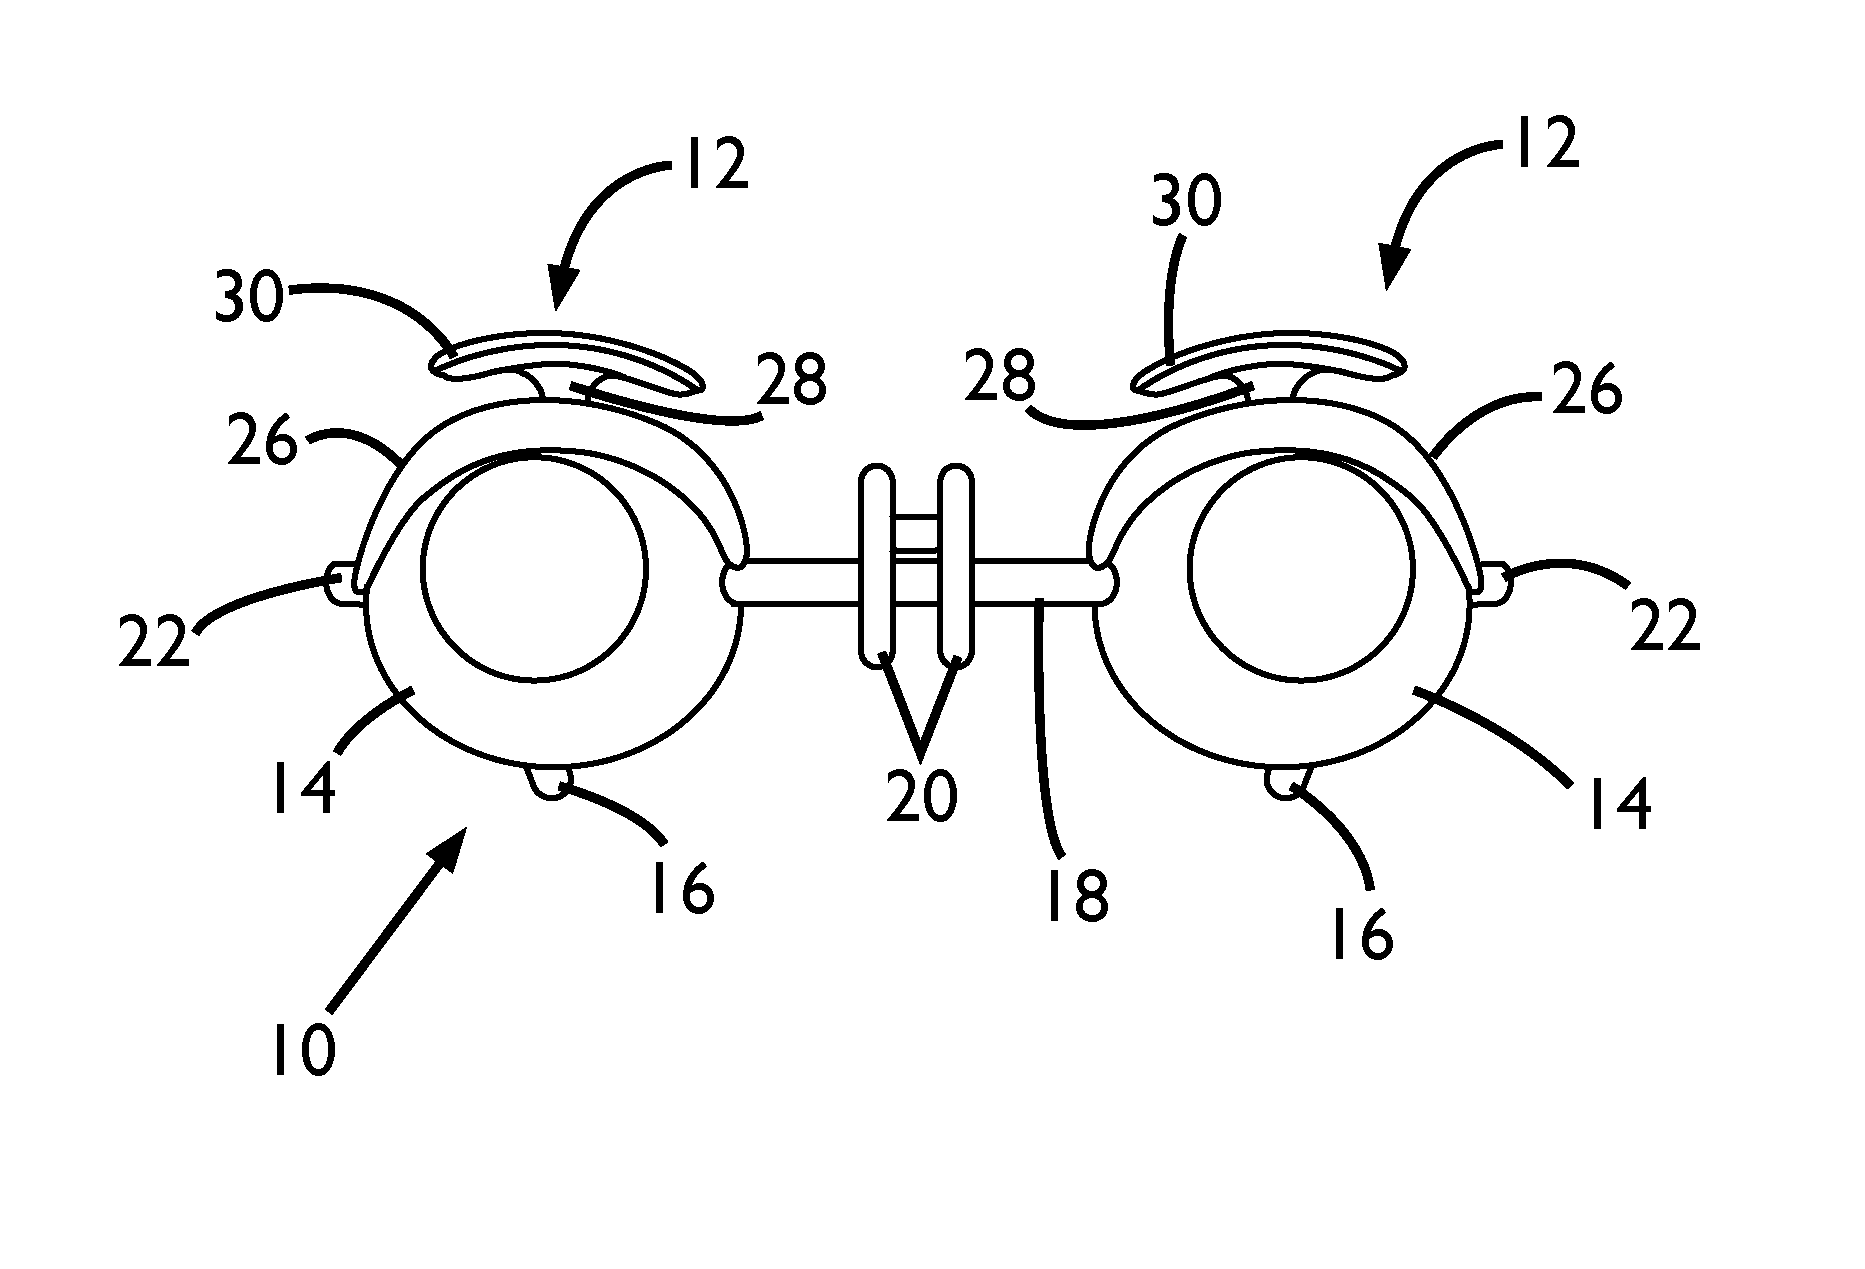 Method and apparatus for attaching plush to an artificial eye